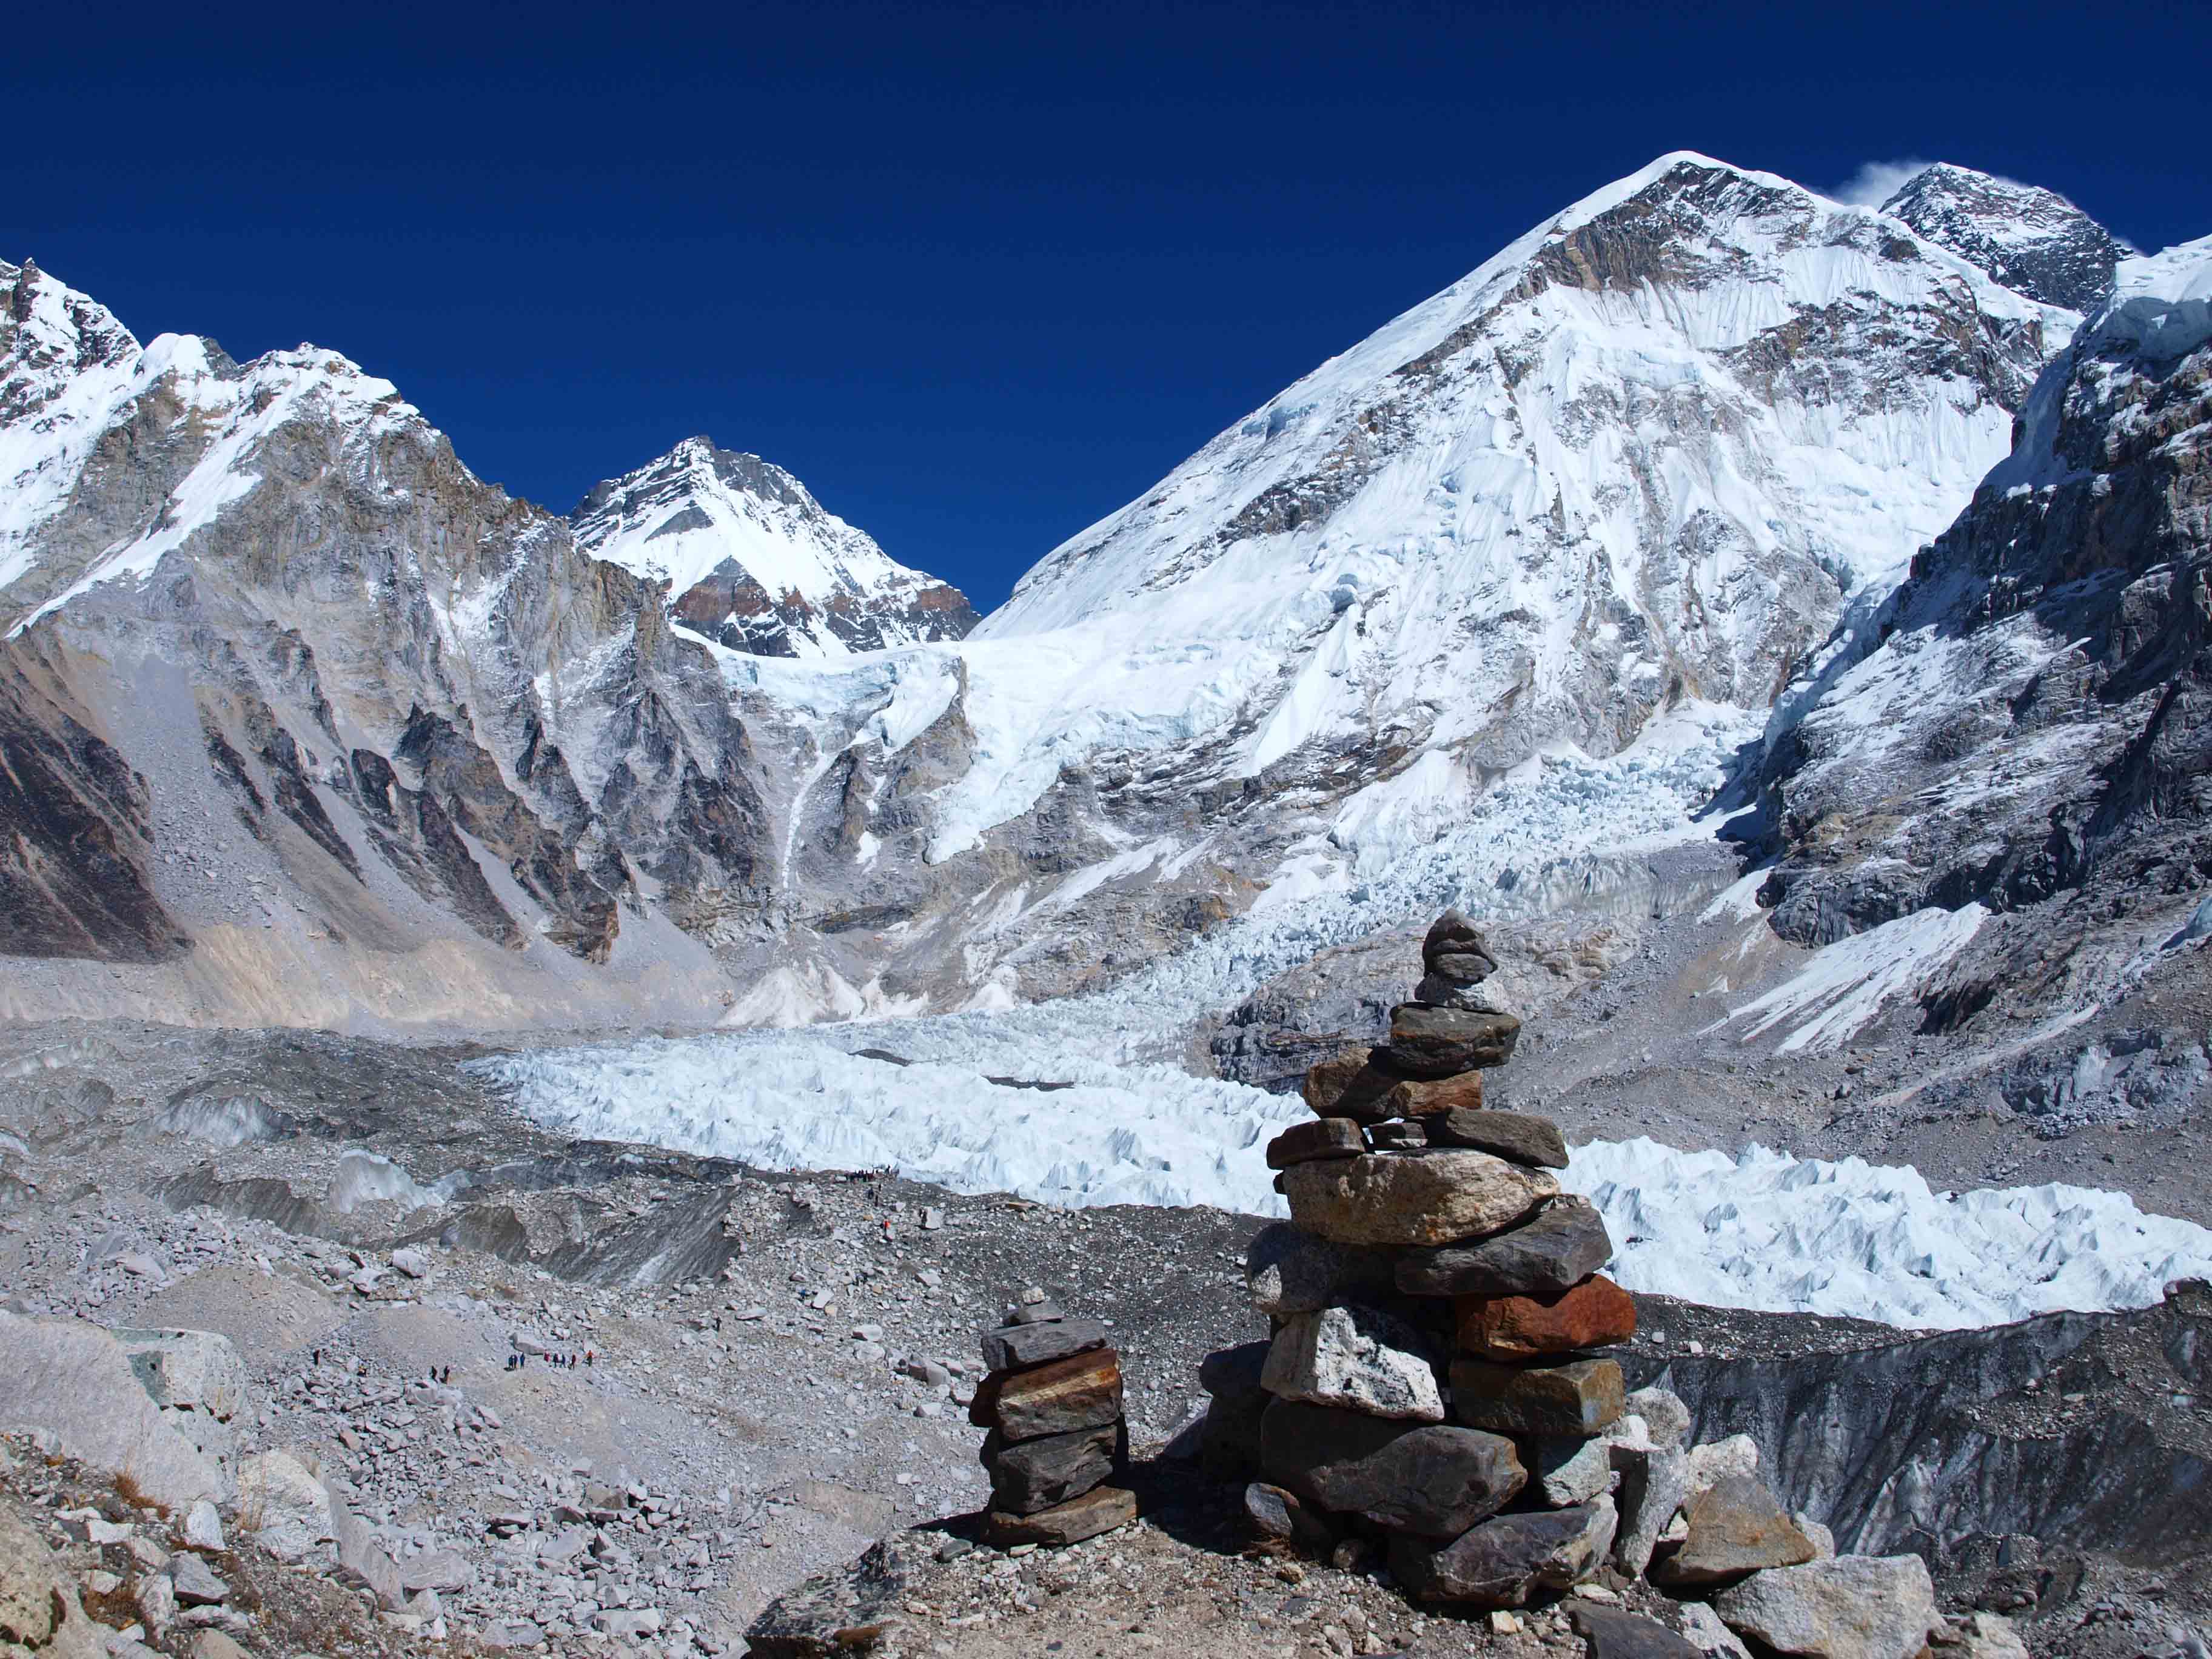 View of the Kumbu Ice Fall and Everest Base Camp